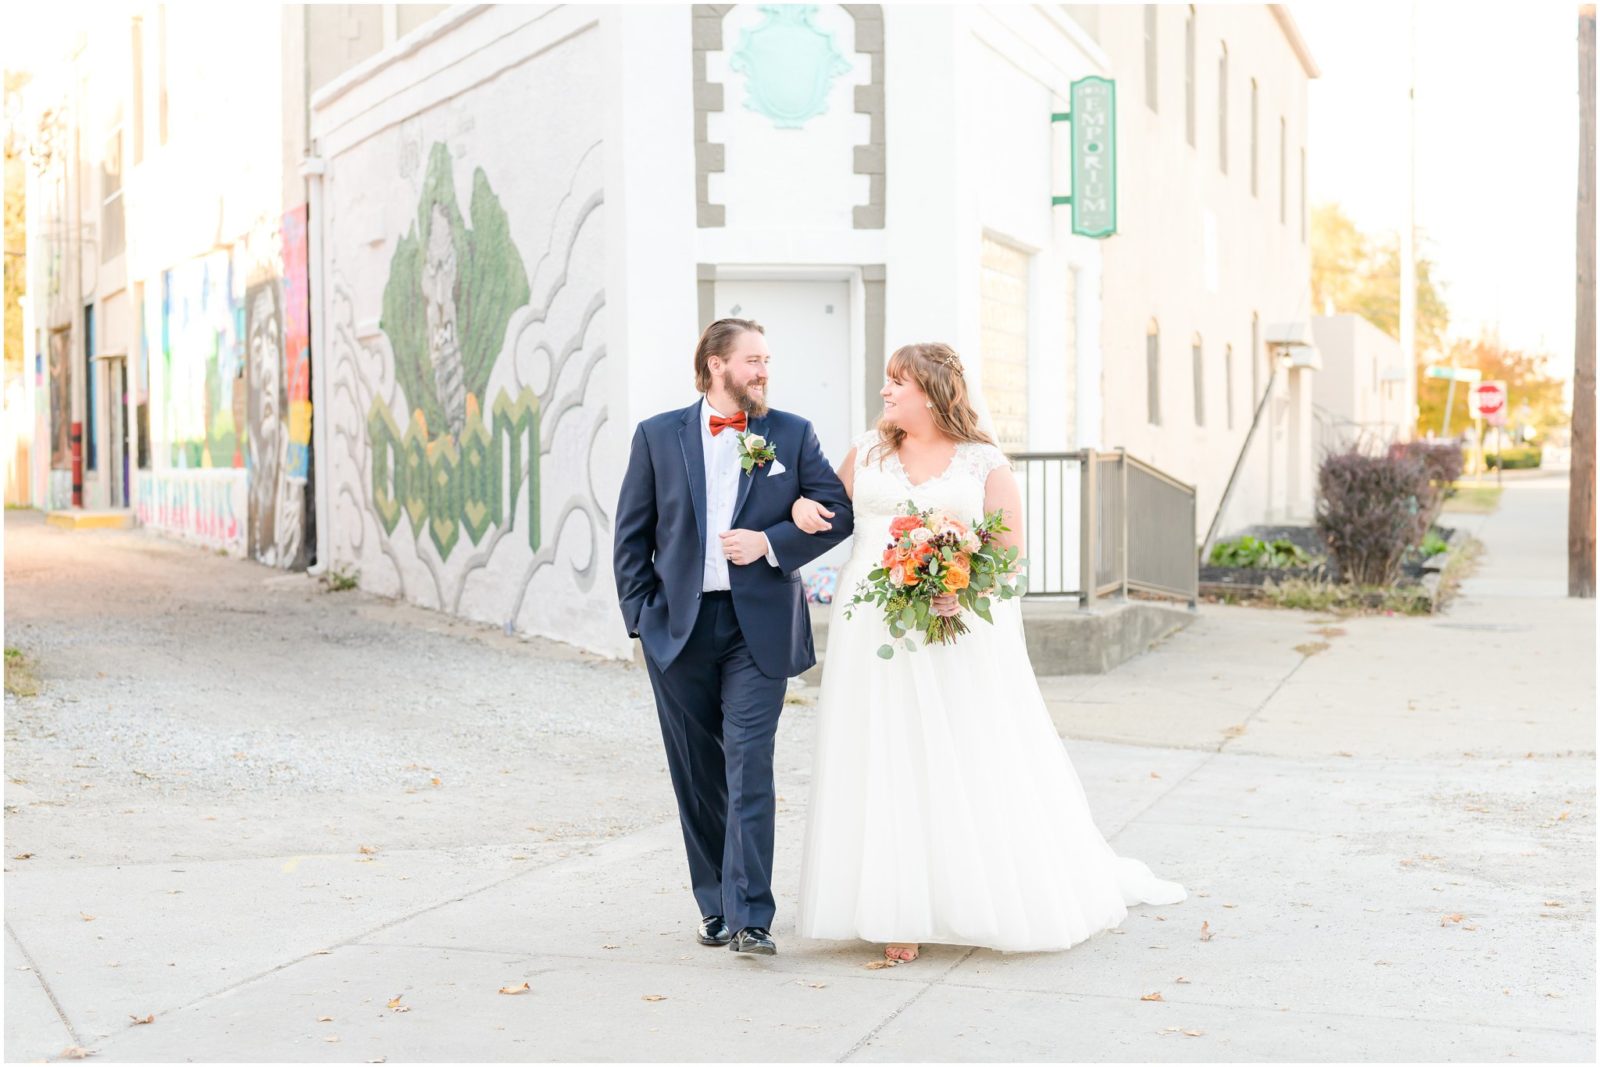 Bride and groom walking and smiling together Fountain Square Theatre wedding